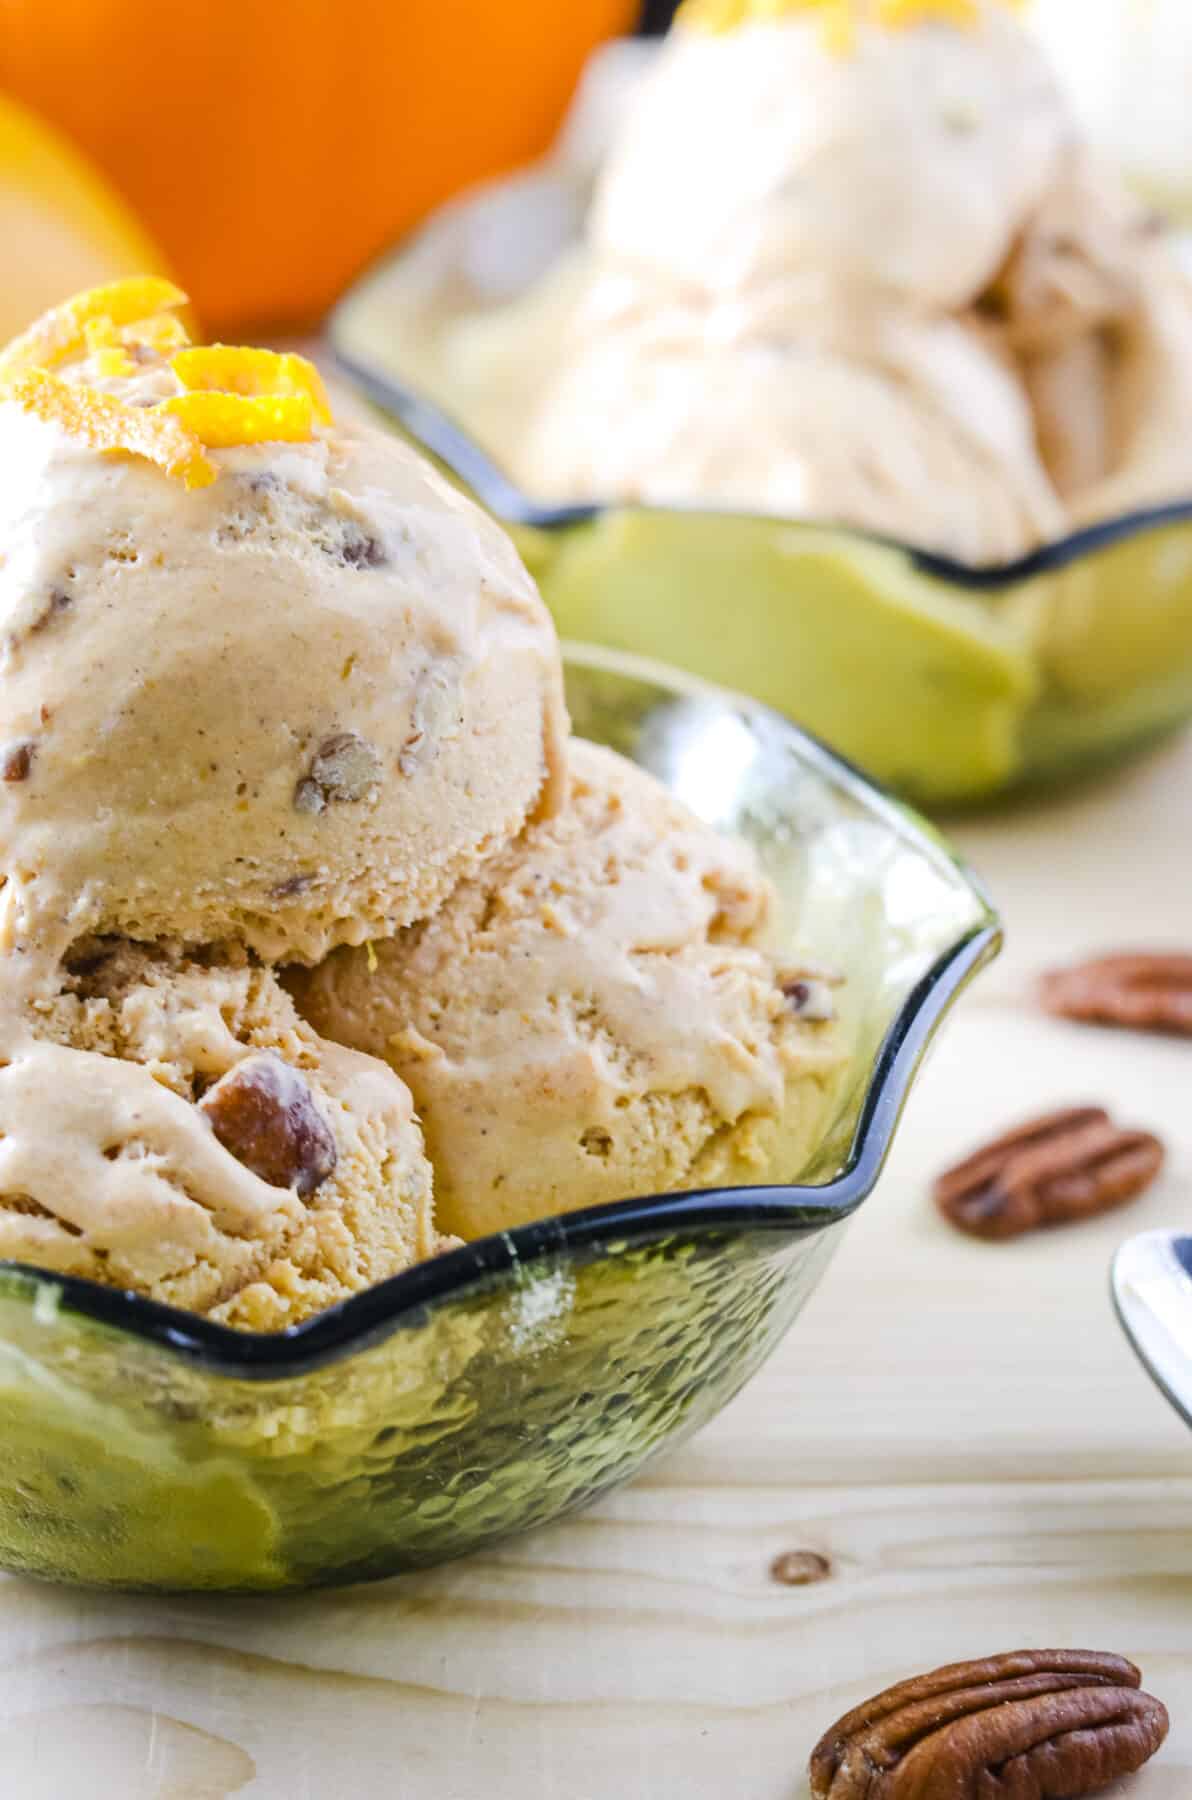 scoops of pumpkin ice cream in a green glass bowl surrounded by pecans